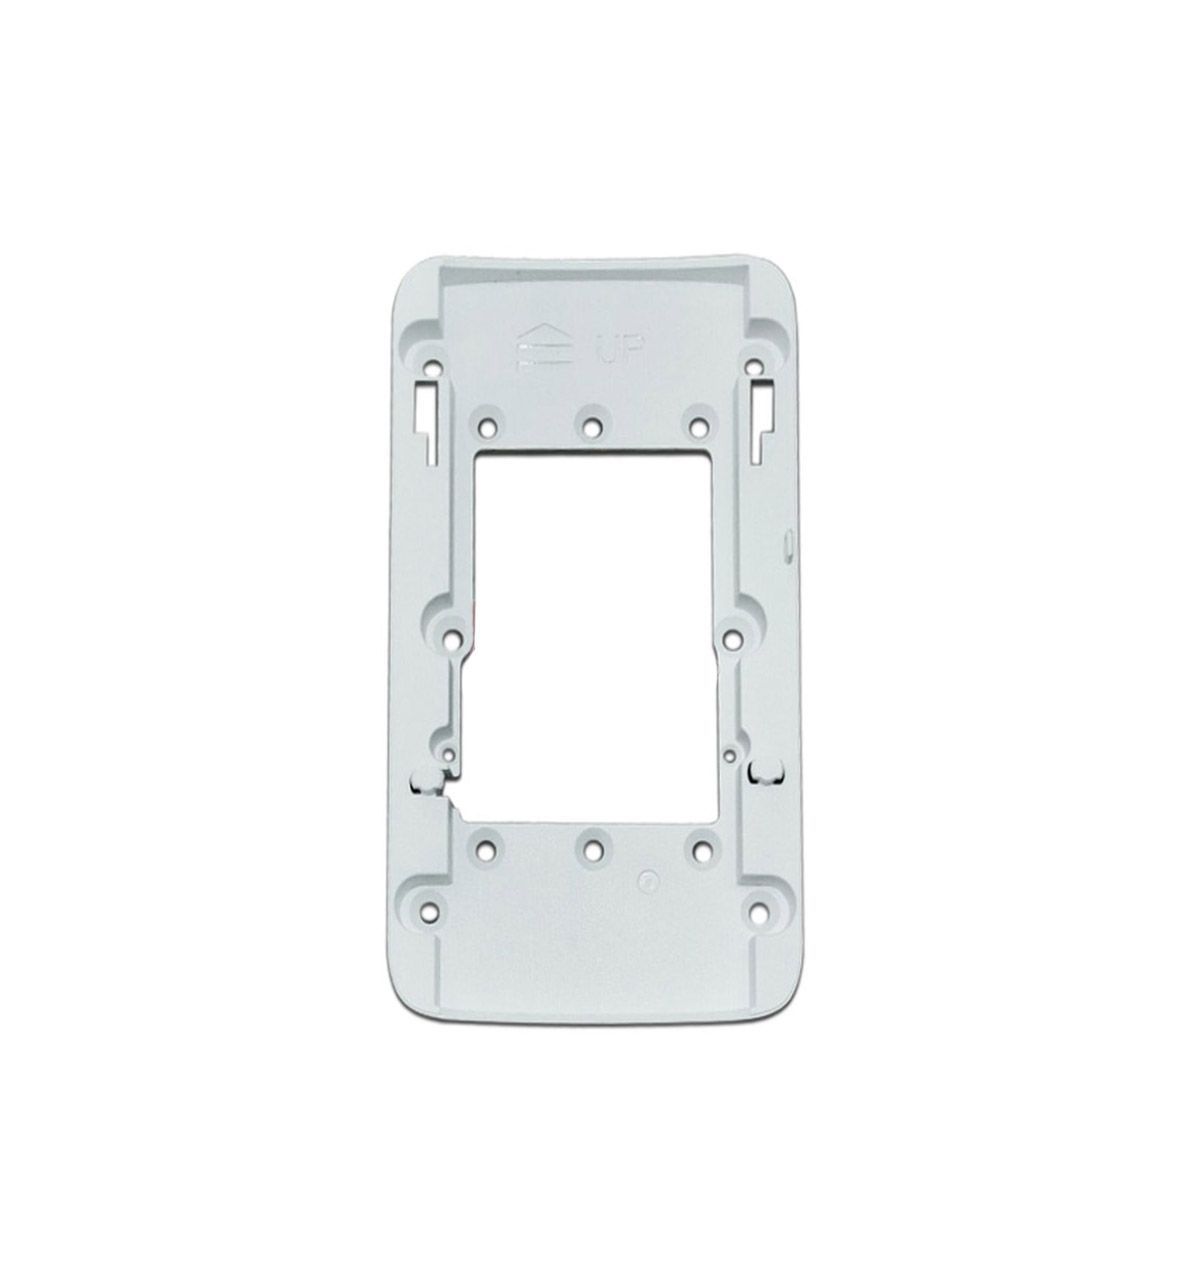 Aruba AP-500H Series Wall-box Mount Adapter Kit with Spare Single-gang (AP-500H-MNT1)_1